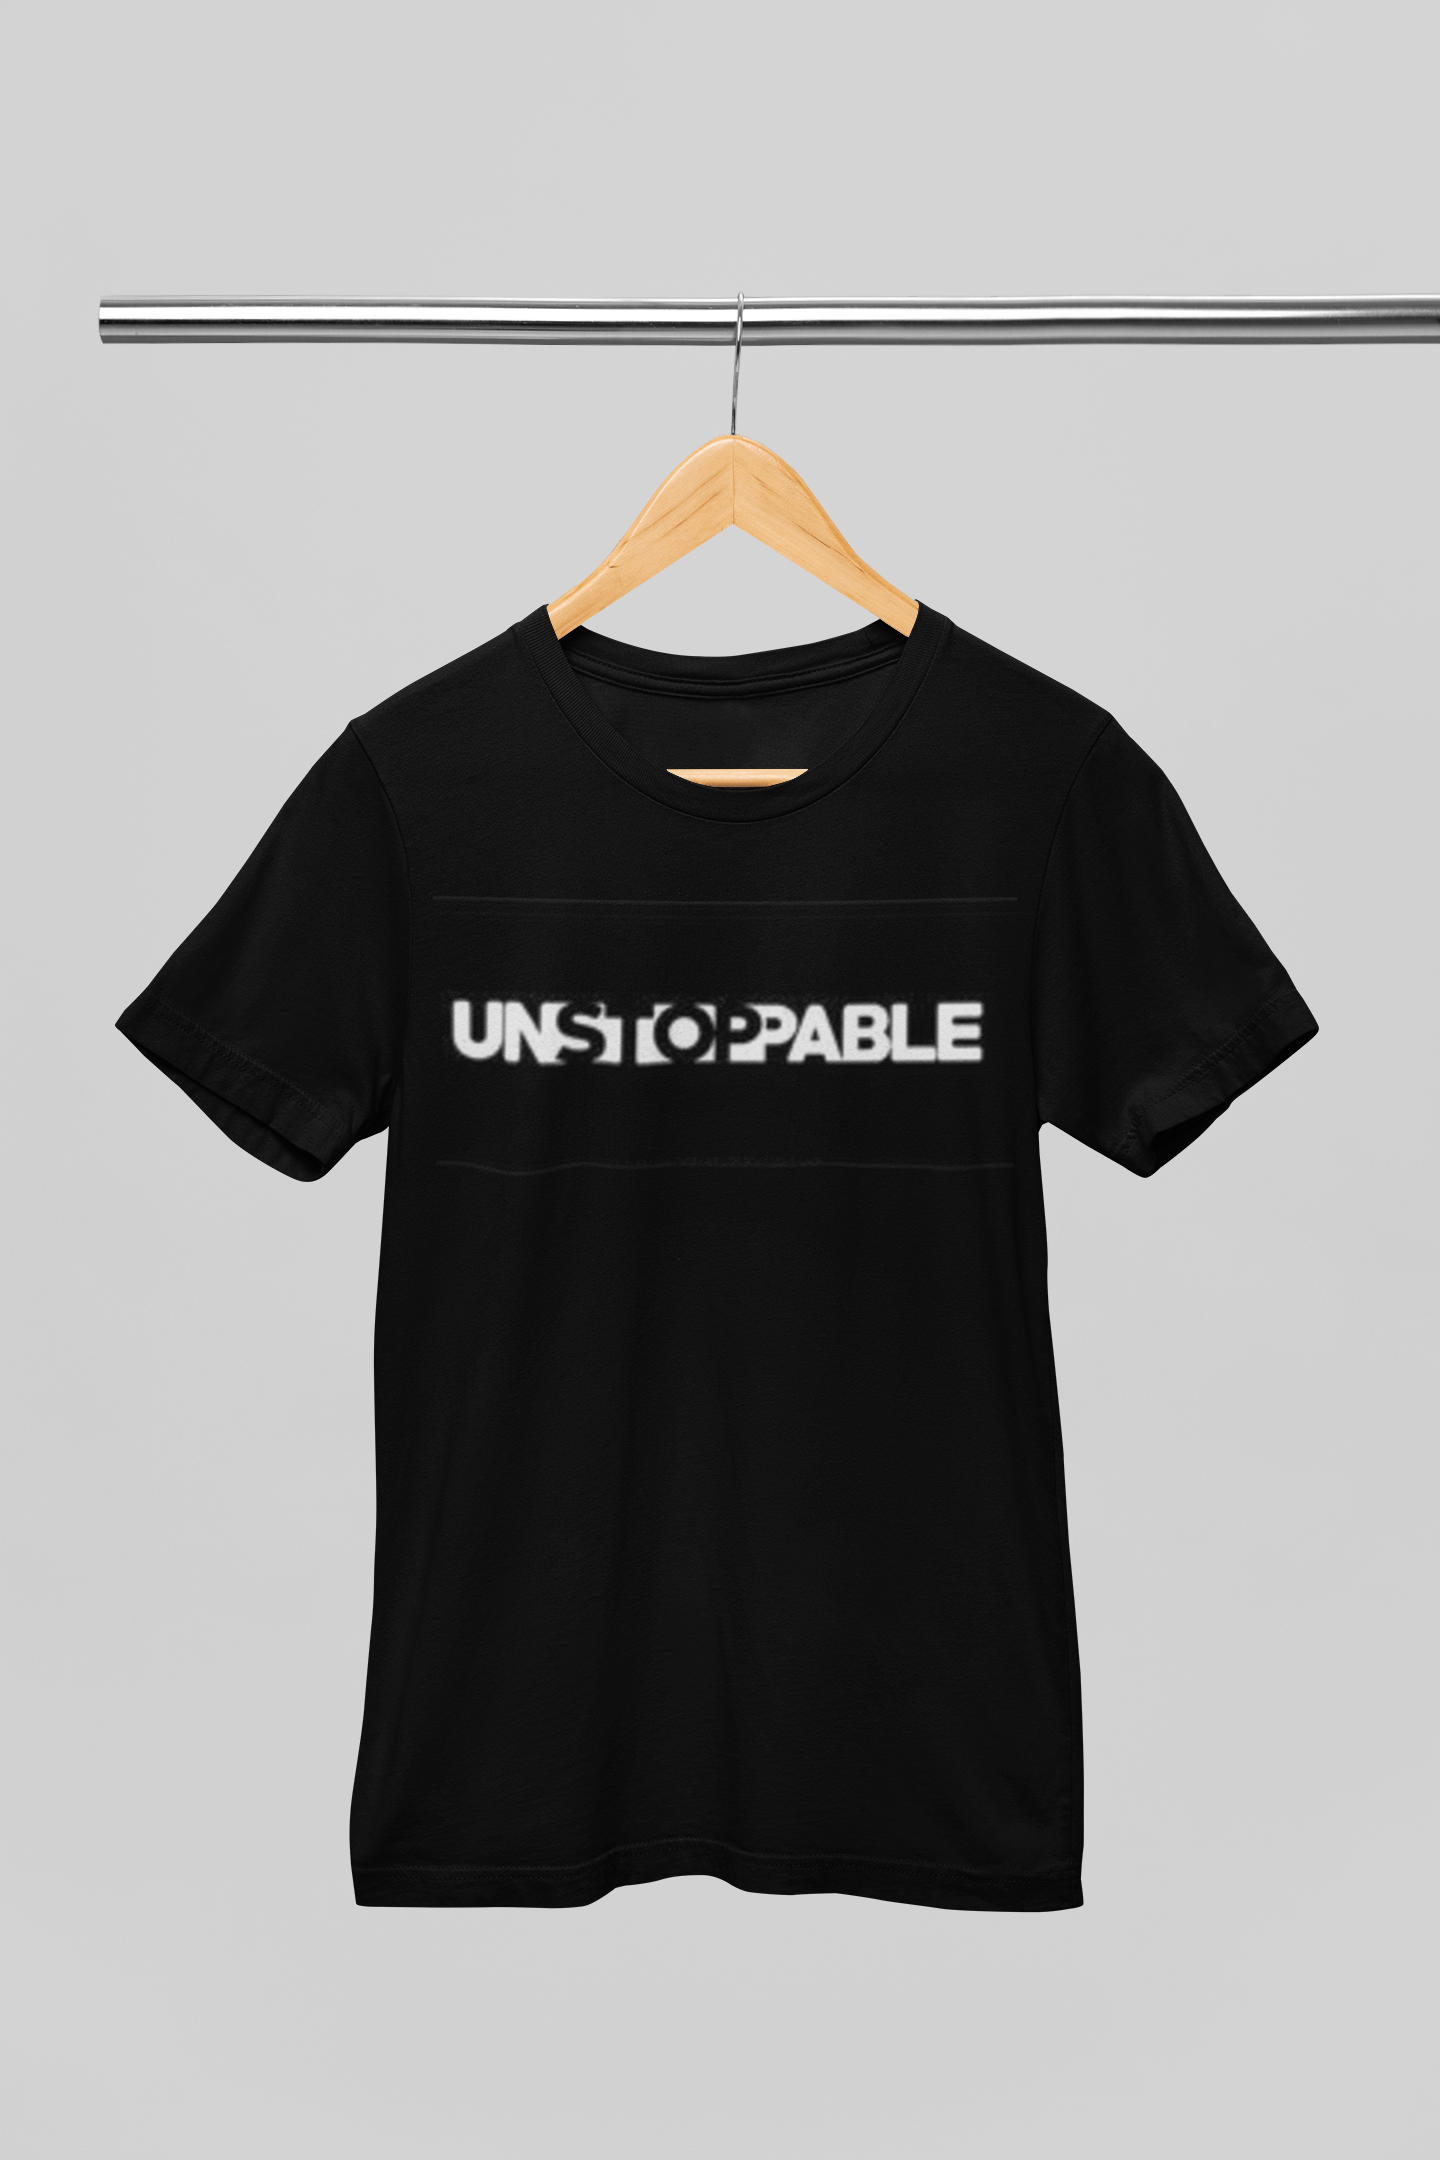 Unstopable Round Neck Printed T-shirt